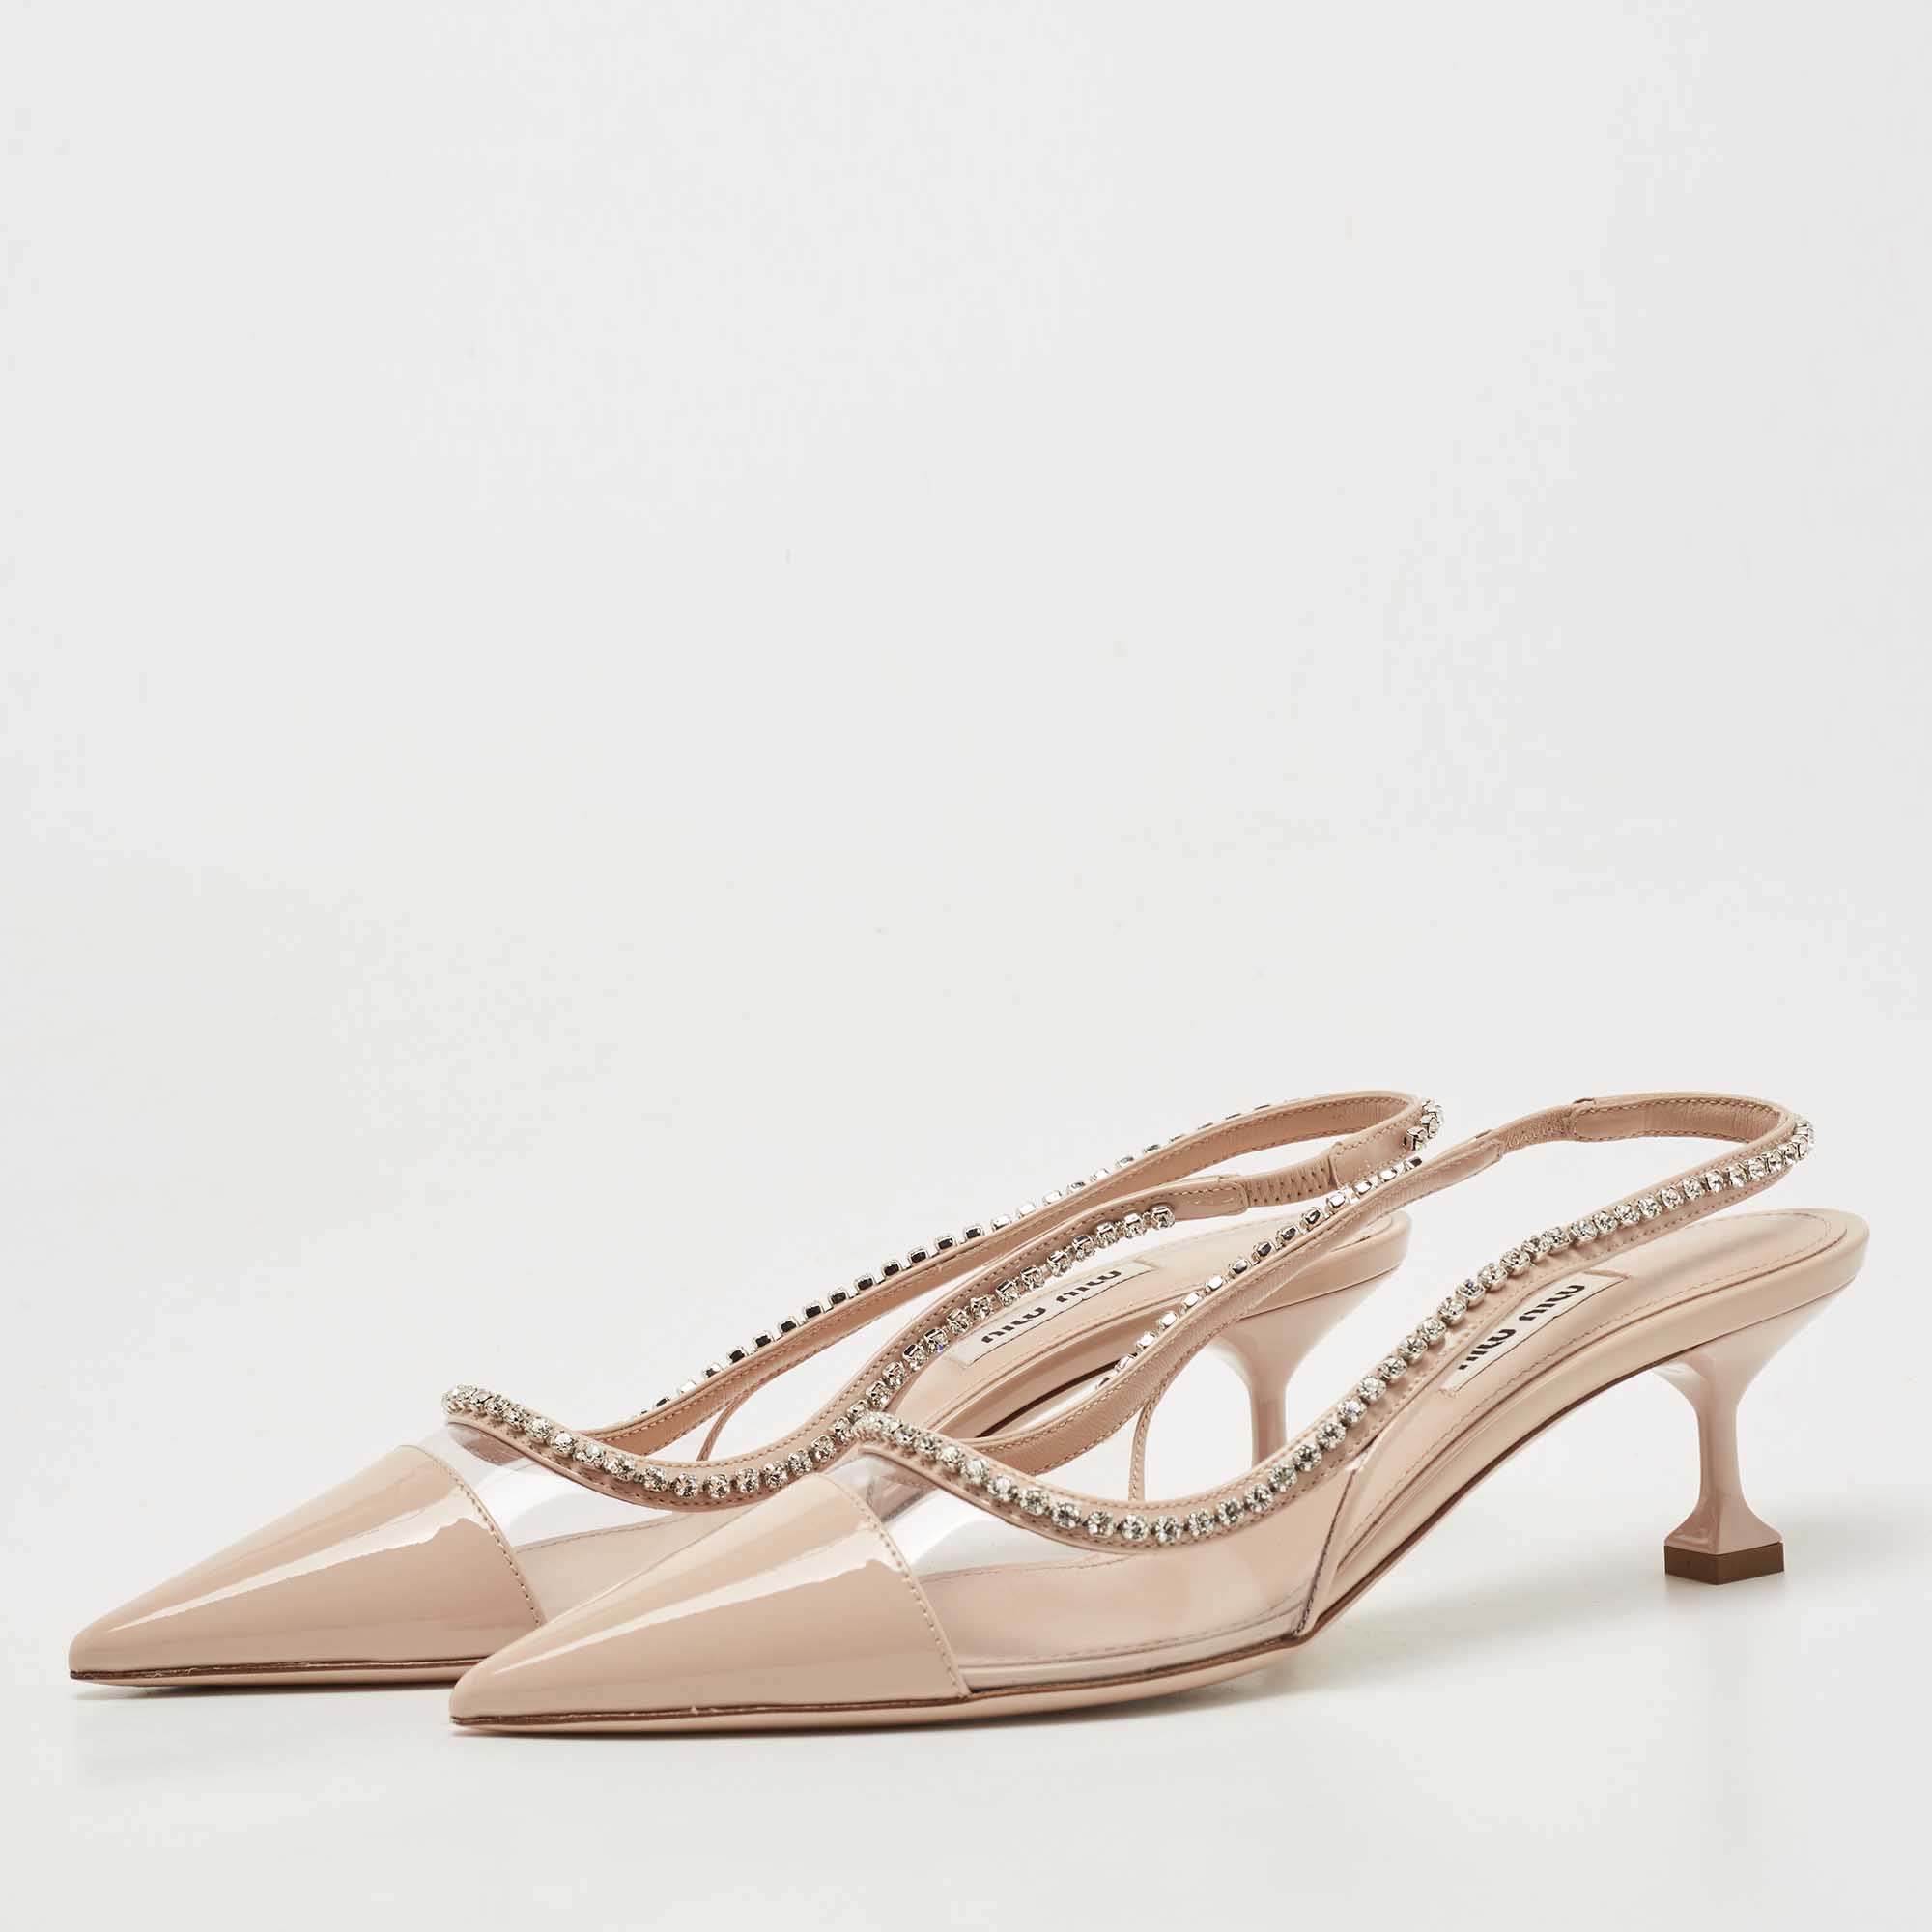 

Miu Miu Beige Patent Leather and PVC Crystal Embellished Slingback Pumps Size